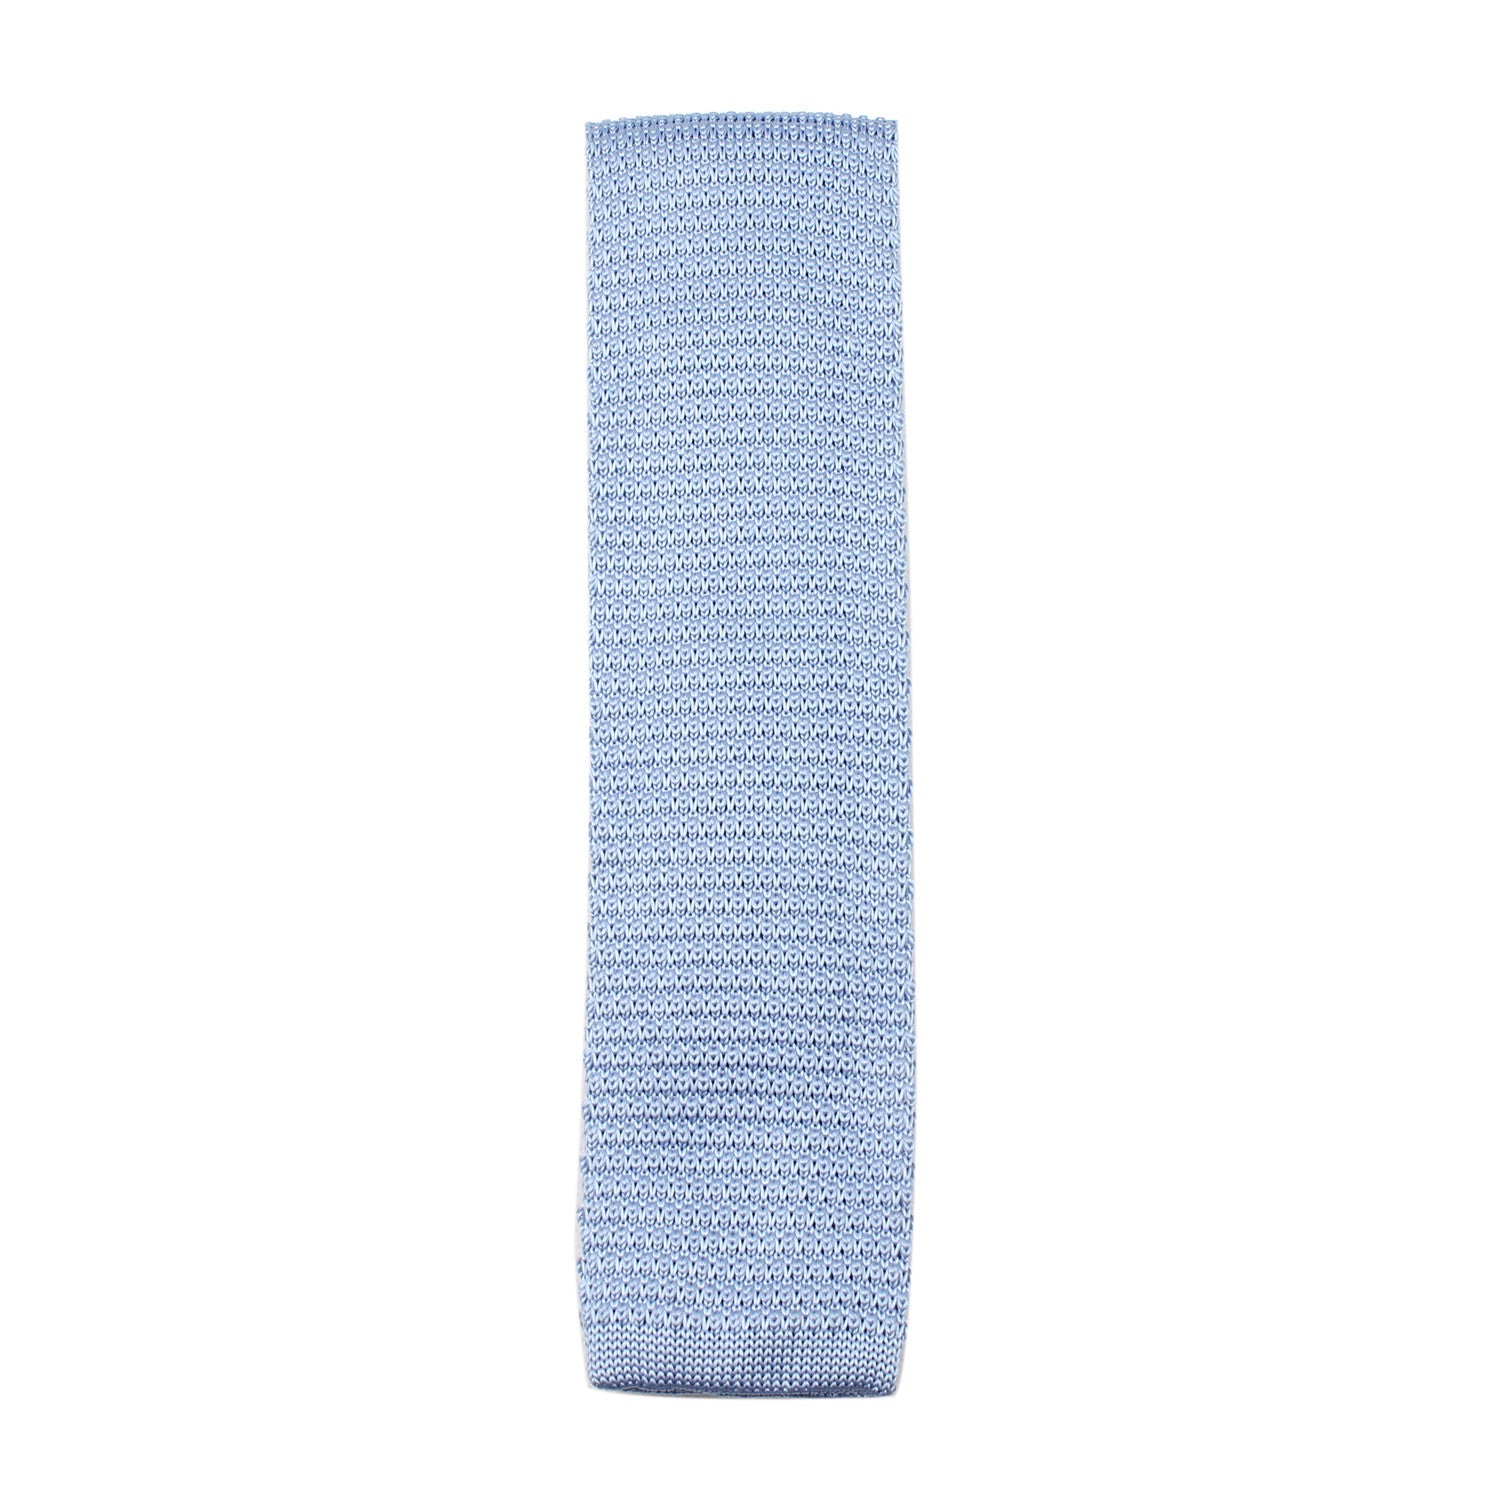 Columbia Light Blue Knitted Tie | Knit Ties Knits Neckties Skinny ...